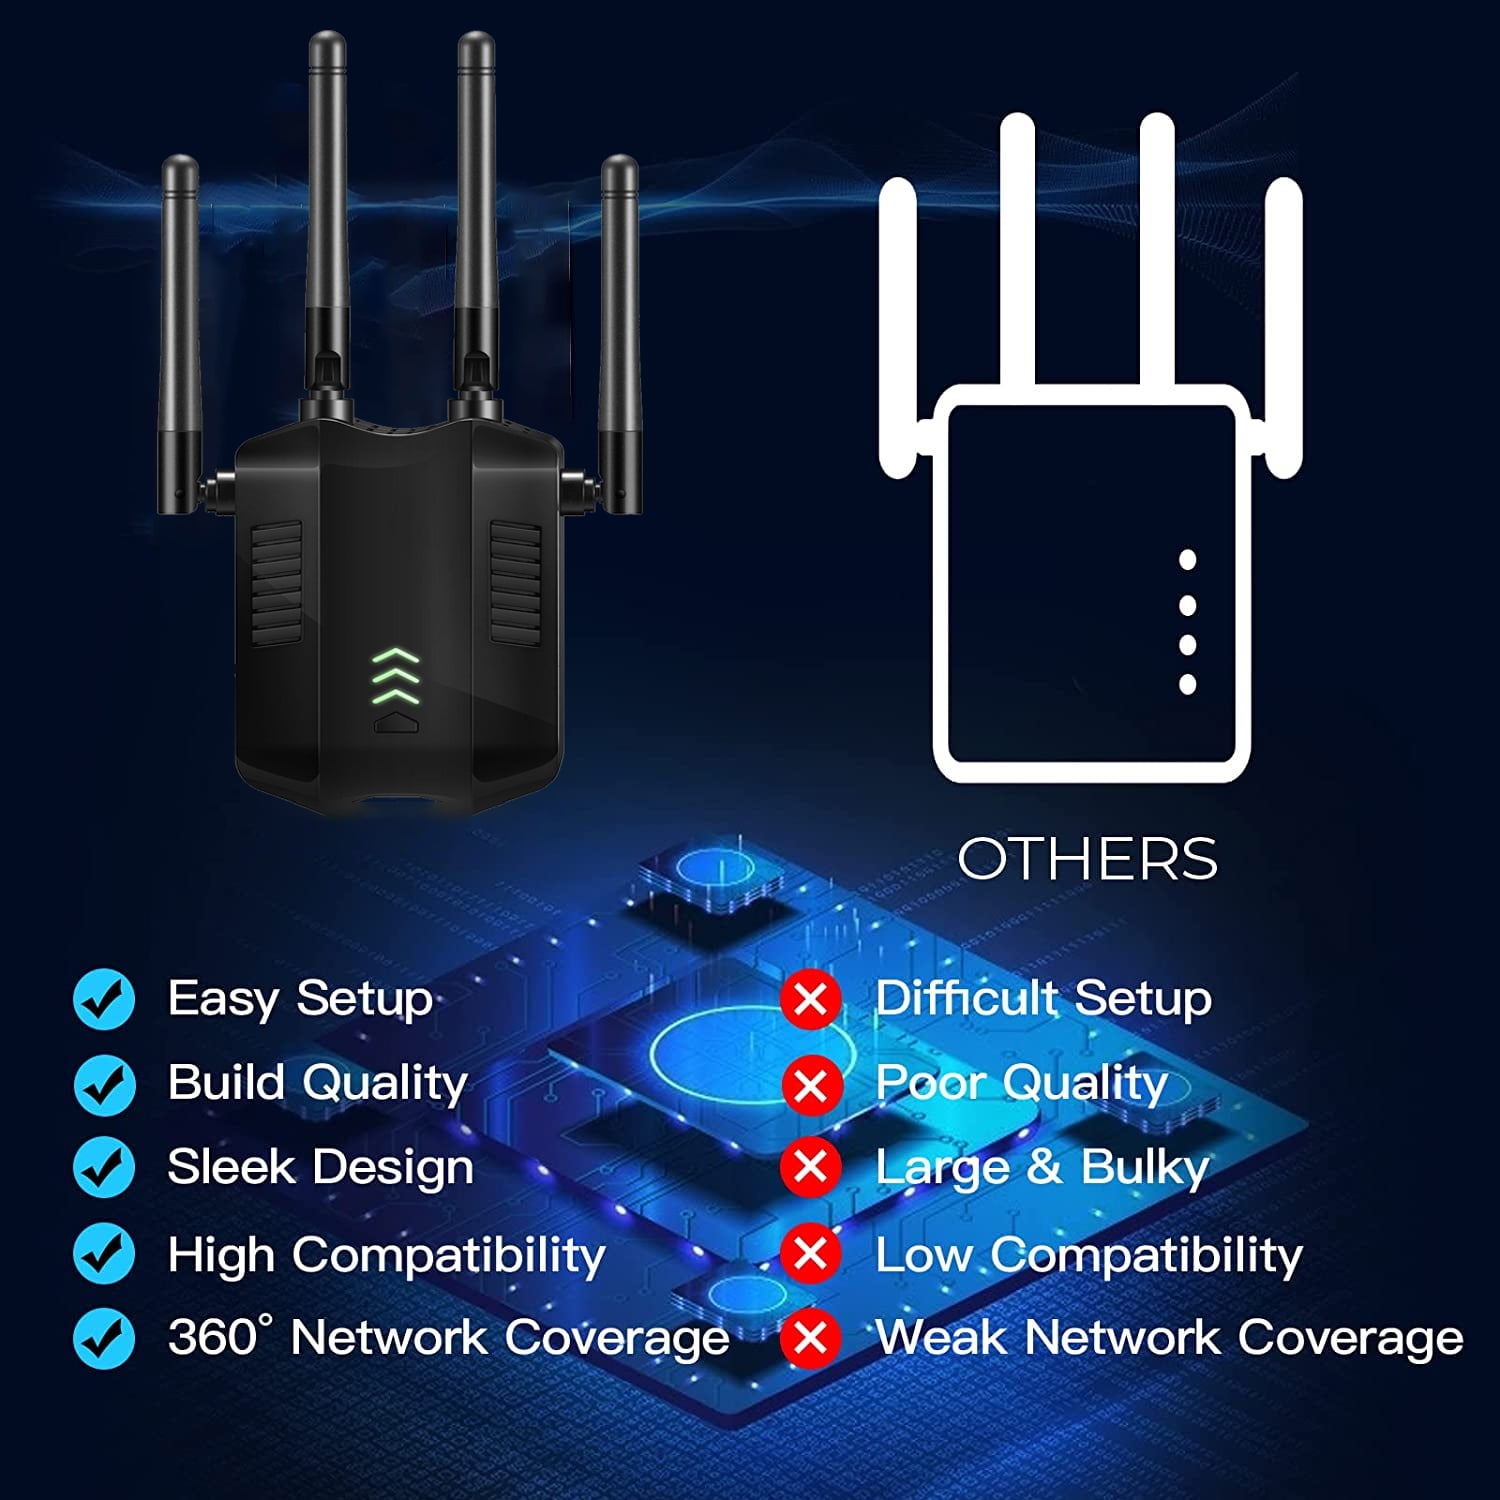 WiFi Range Extender, 1200Mbps Signal Booster Repeater Cover up to 8000 sq.ft, 2.4 & Dual Band WiFi Extender, 4 Antennas 360° Full Coverage Wireless Internet Amplifier for Smart Home Devices - Walmart.com